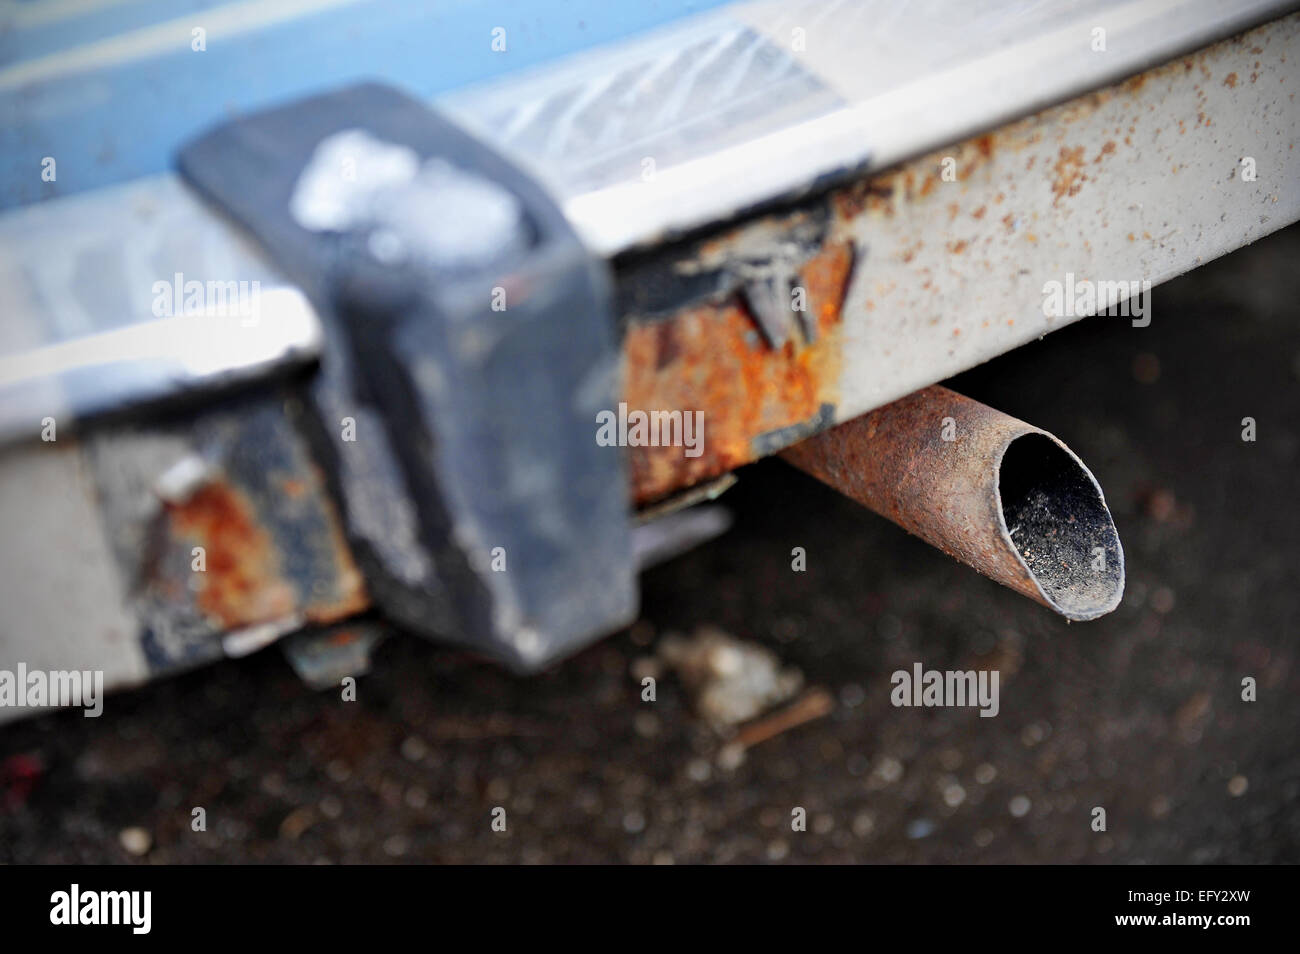 Detail shot with an old car exhaust pipe Stock Photo